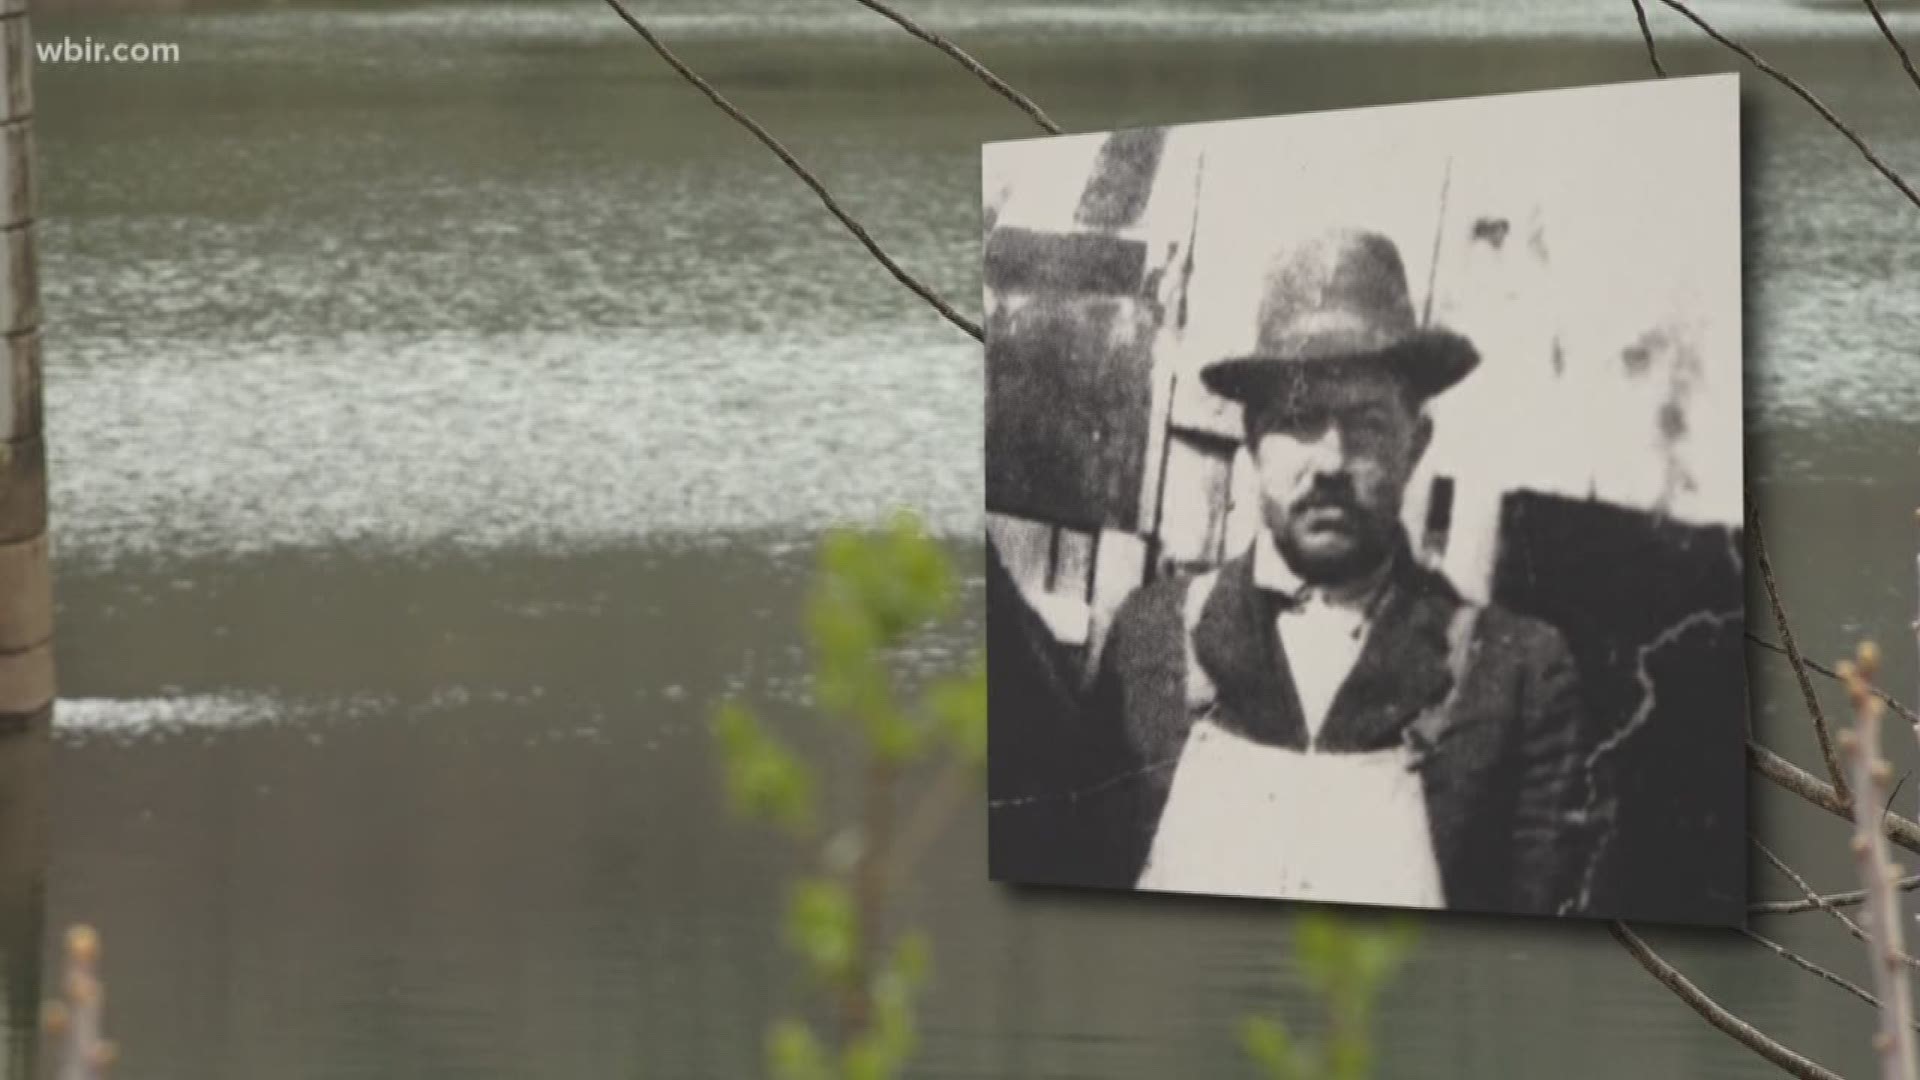 In 1929, a flood devastated a Roane County community, wiping out homes and businesses and killing more than  40 people. But many were also saved, thanks to heroes like Robert "Bob" Underwood,  who died rescuing people from the rushing water.